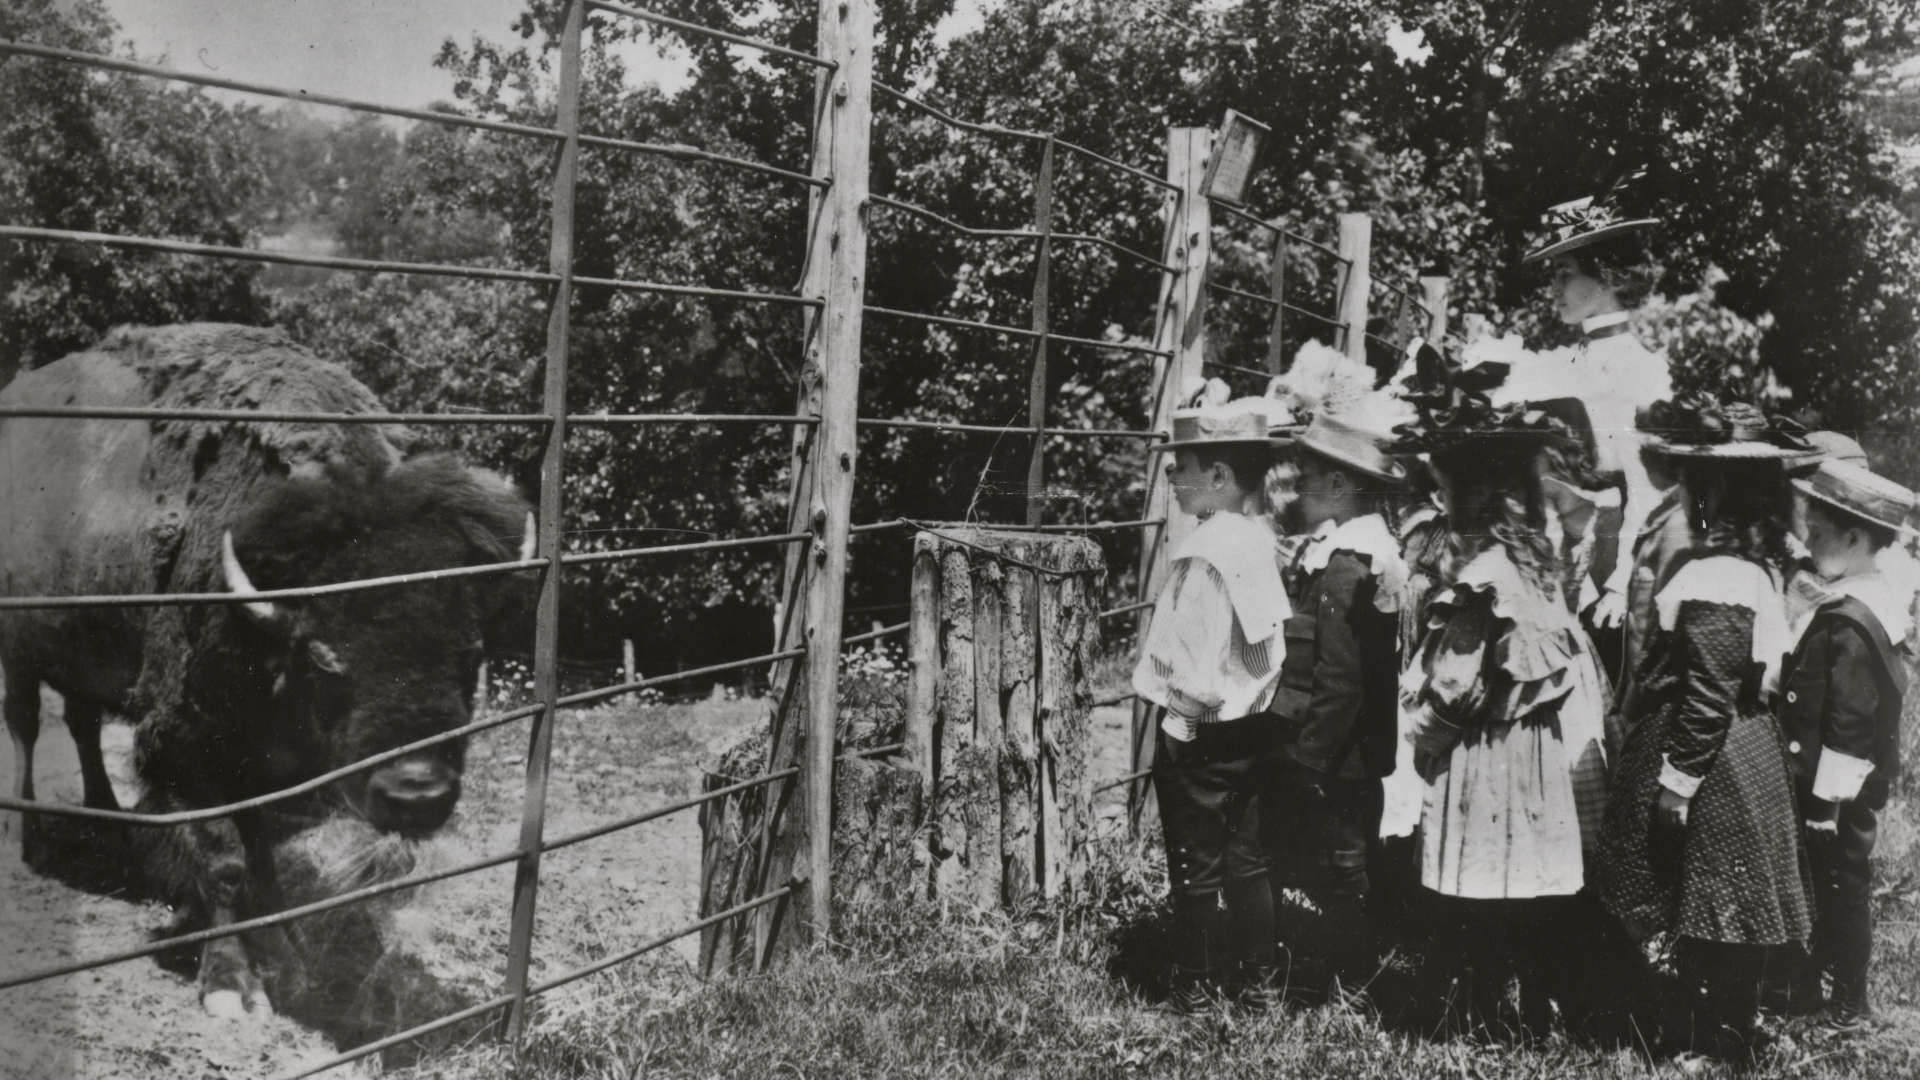 A group of school children in 1899 viewing the first bison at the National Zoological Park.